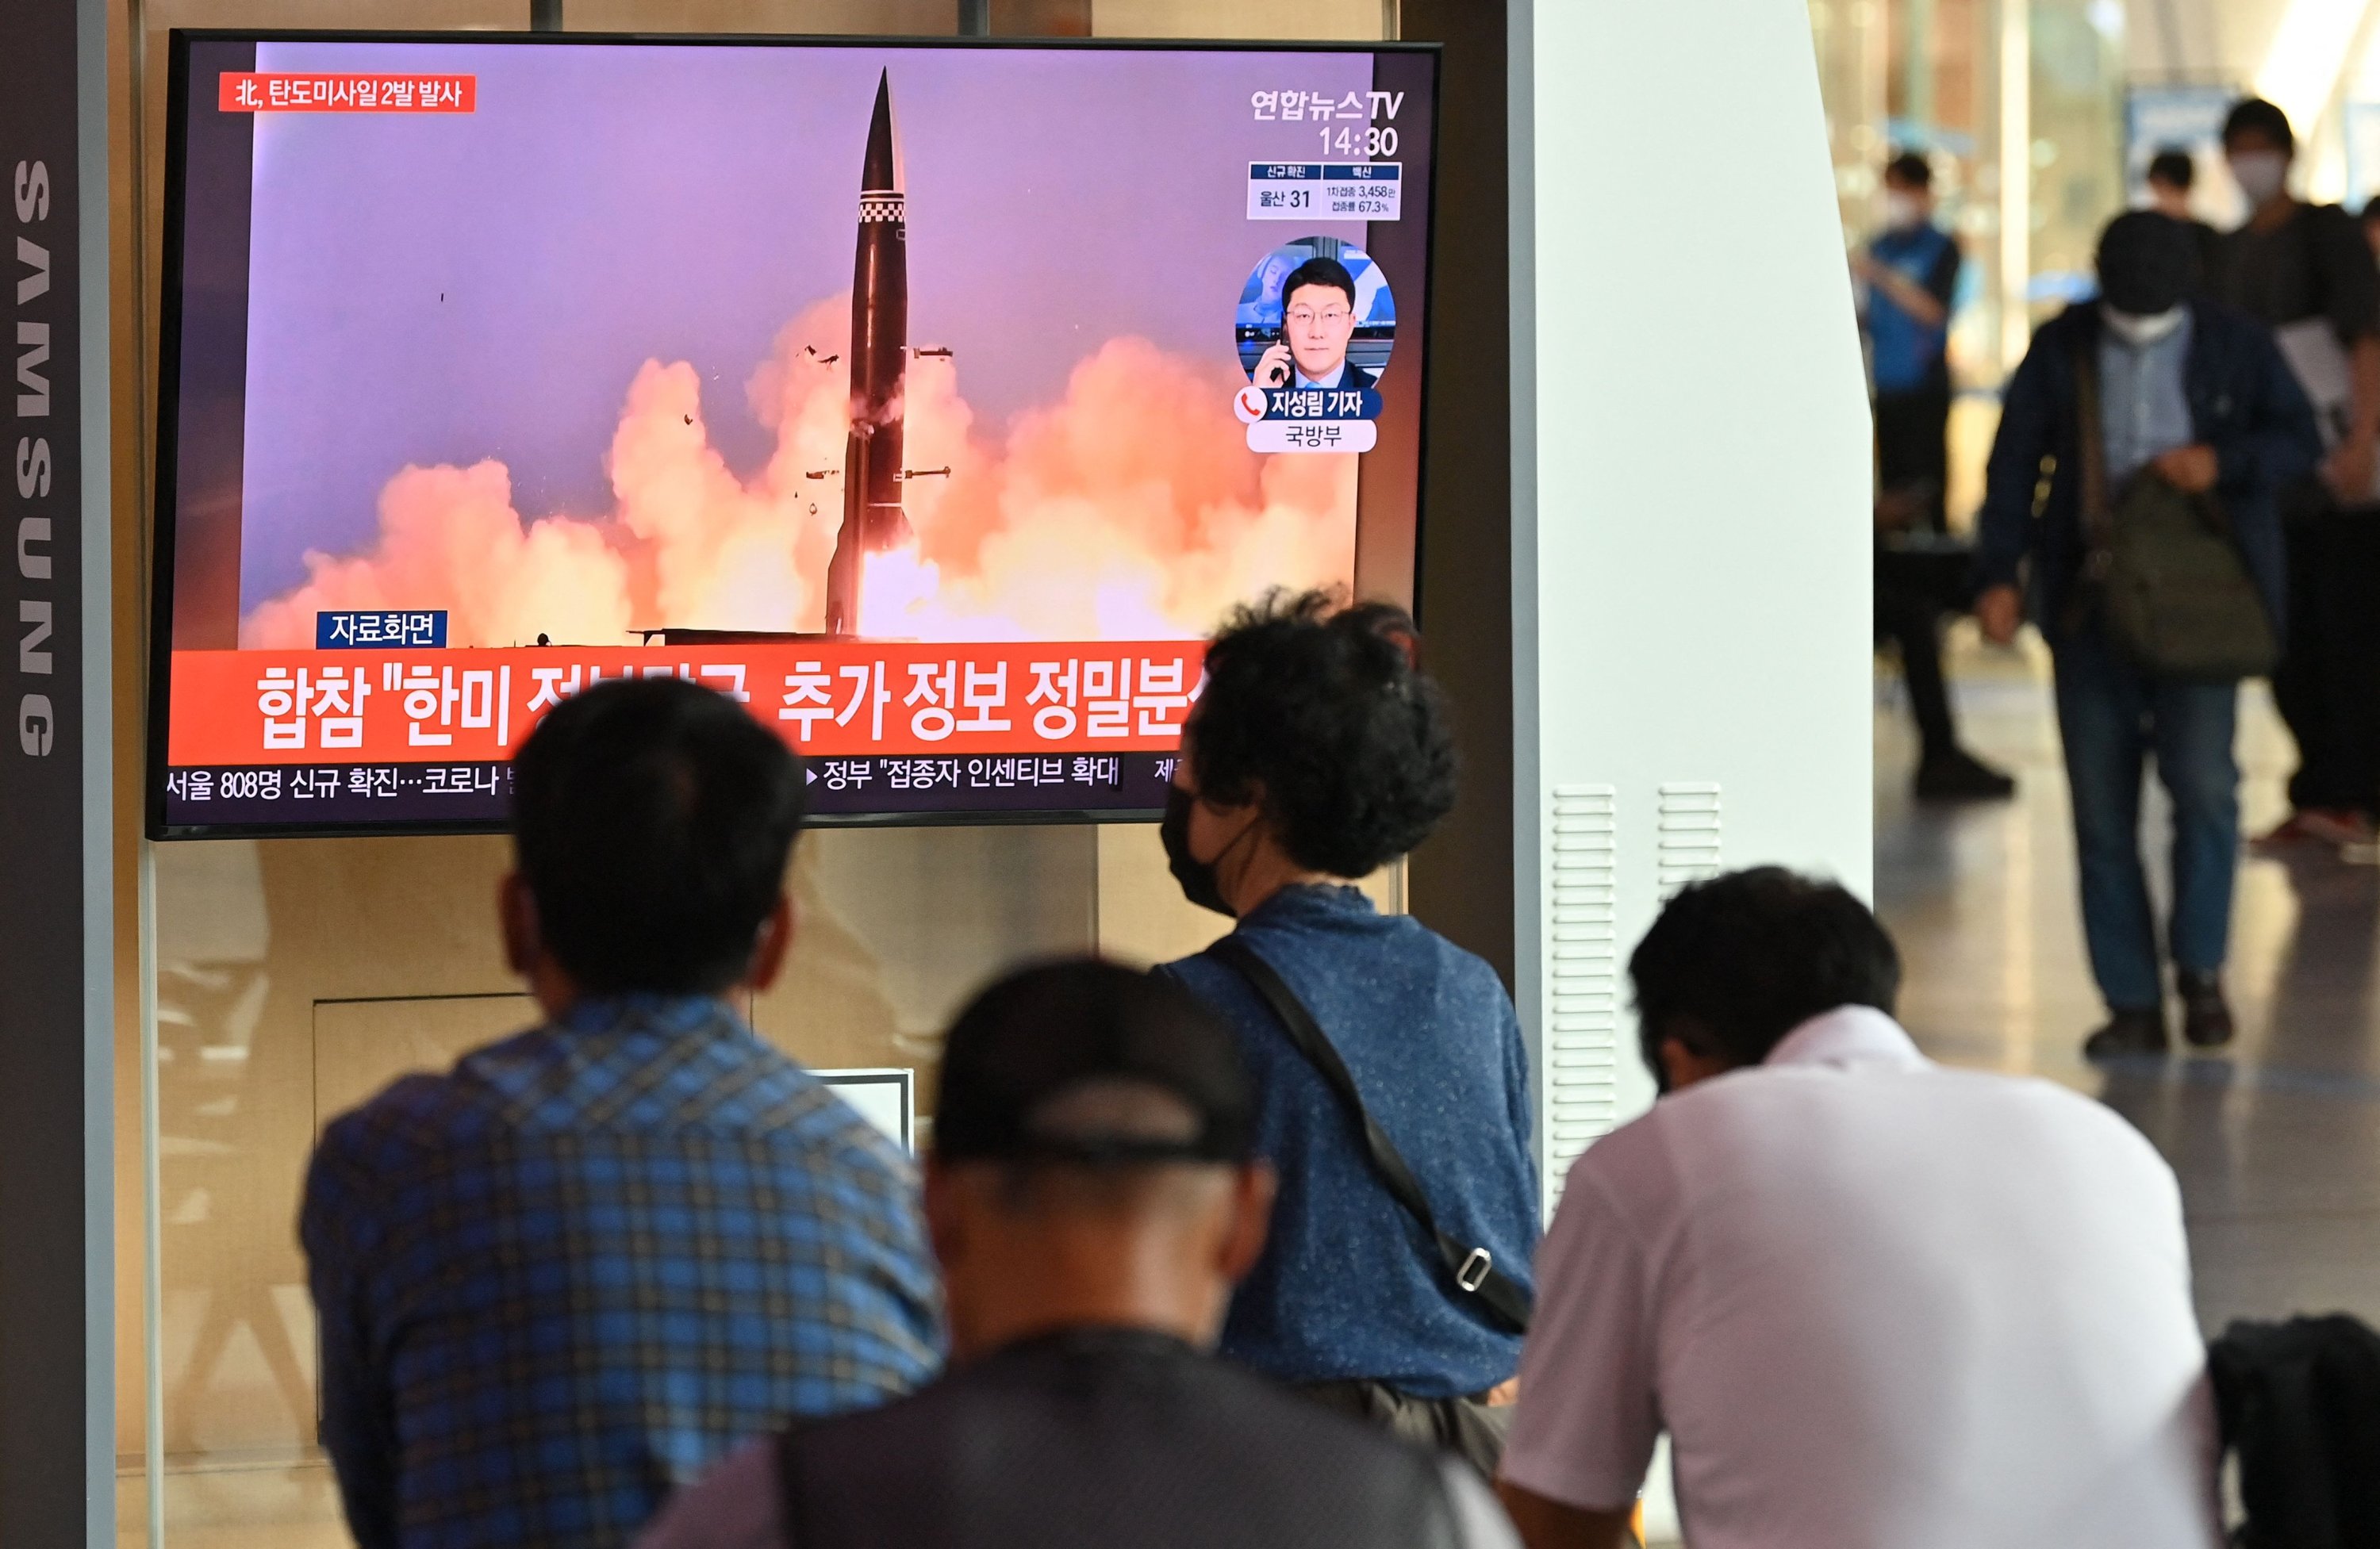 UN Security Council to hold emergency meeting on North Korea | Daily Sabah